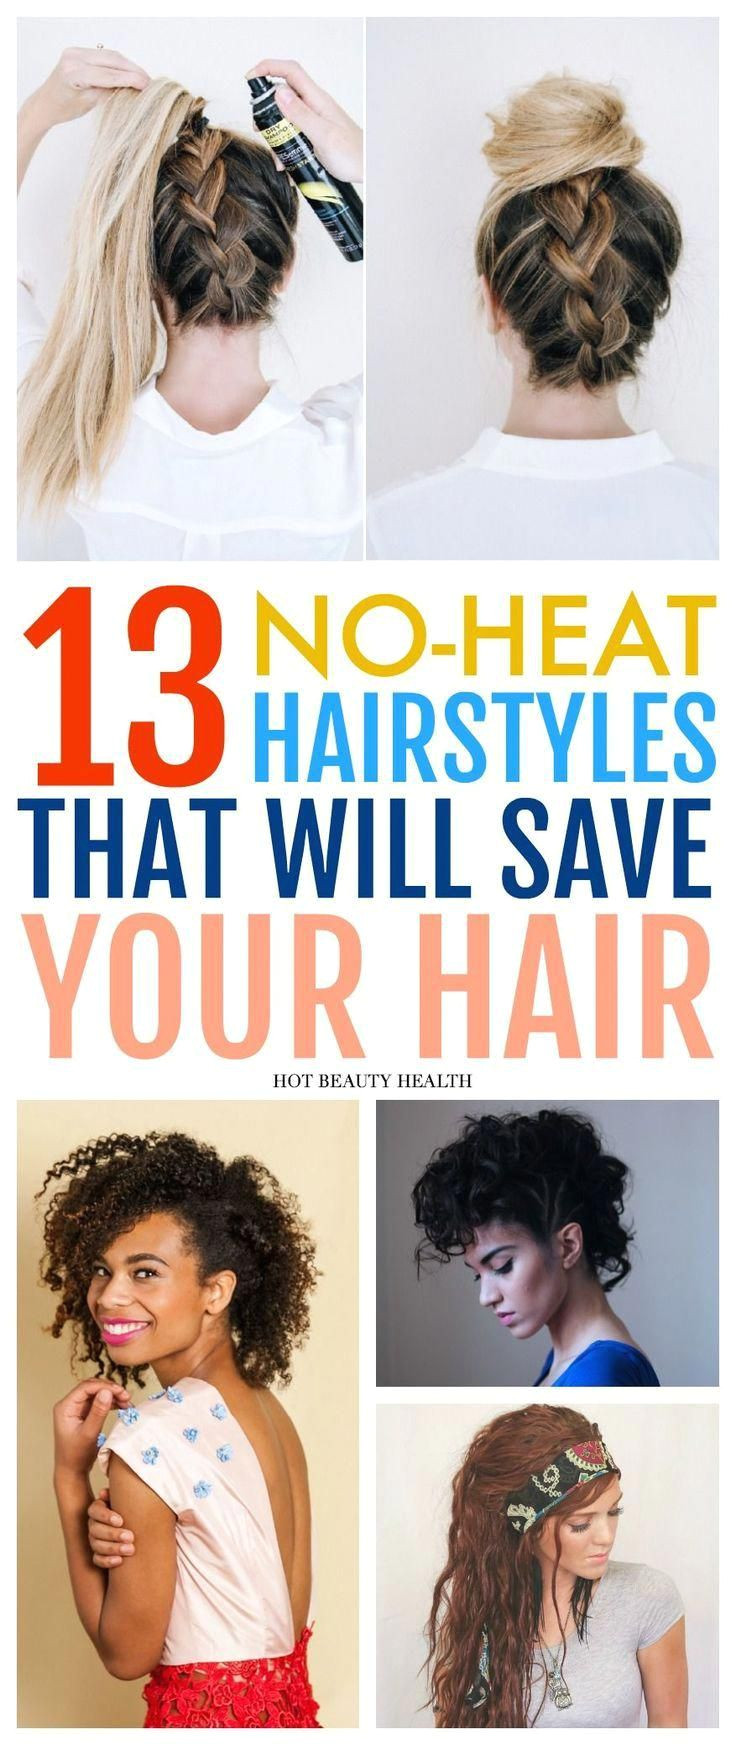 13 easy No Heat Hairstyles that will save your hair this spring and summer Find a style for long hair medium short braids natural curly styles great